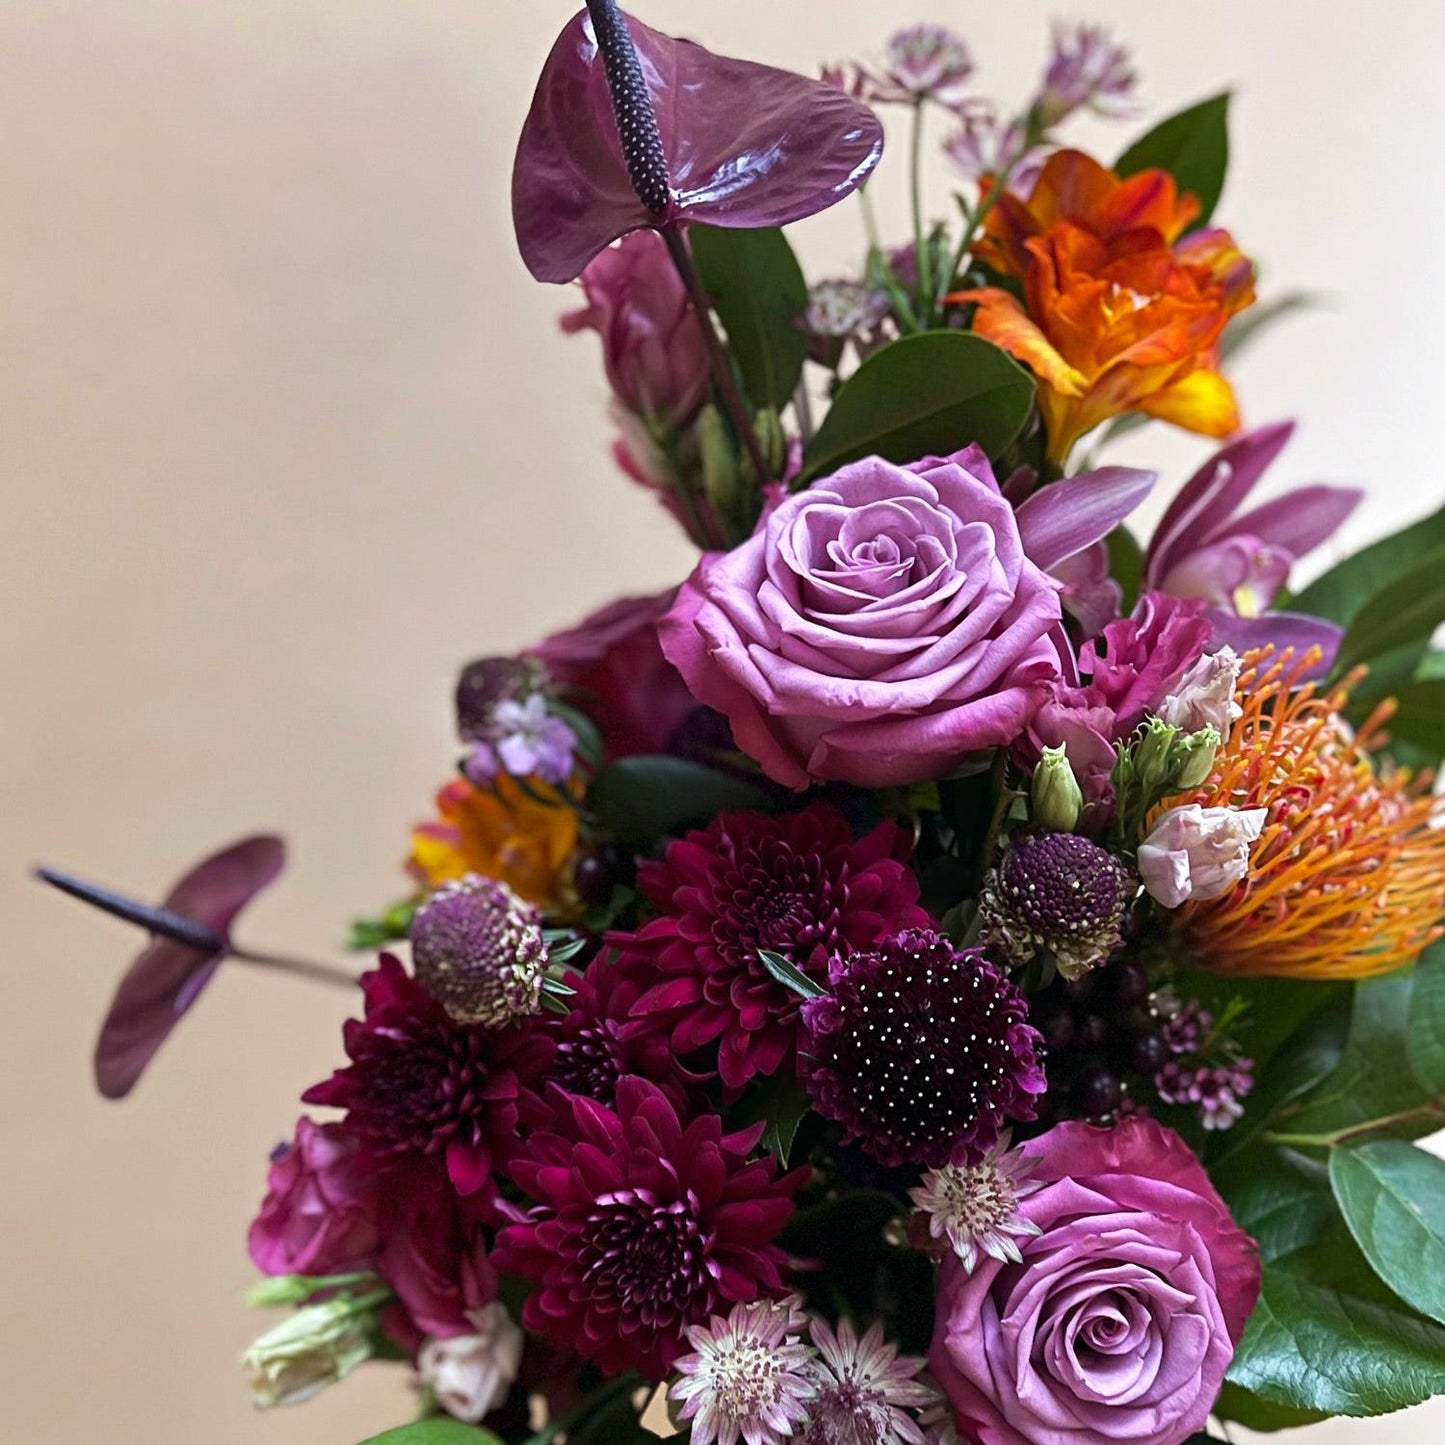 Close-up image of a dynamic bouquet starting with yellows, deepening to lavender and purple, with a touch of acid green for energy. Order online for same-day flower delivery from Toronto's best florist, available near you.